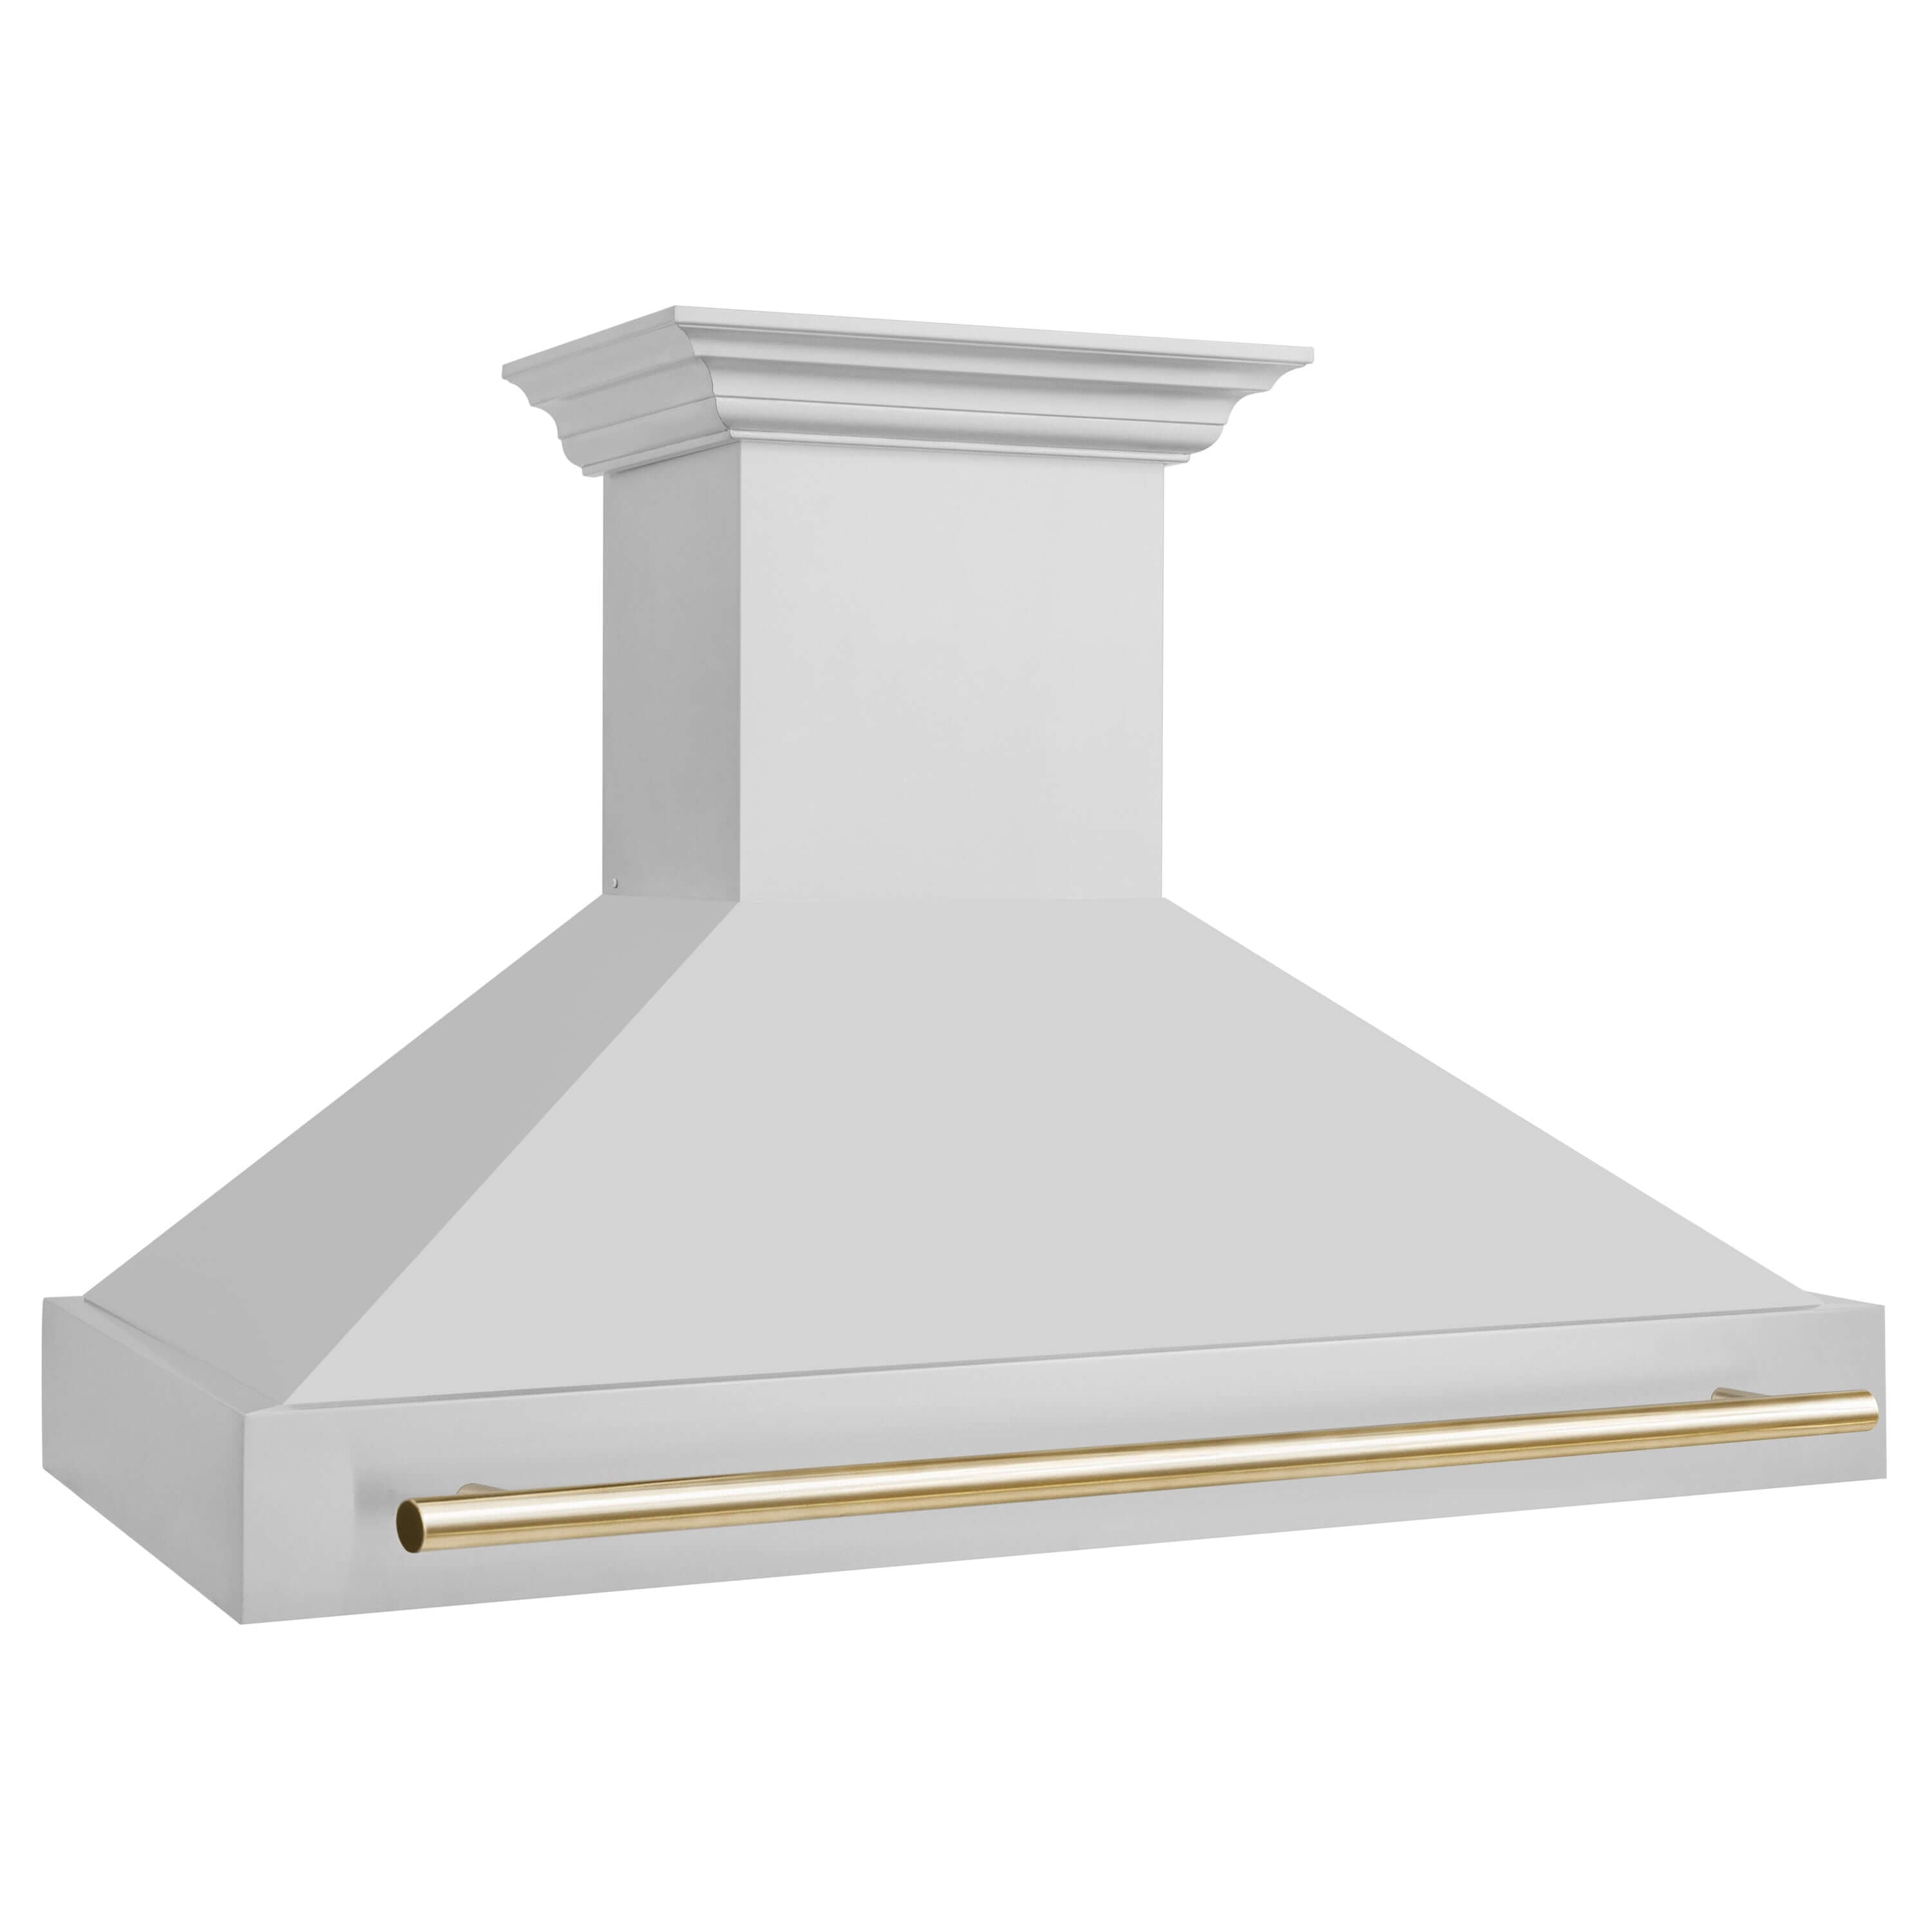 ZLINE Autograph Edition 48 in. Stainless Steel Range Hood with Stainless Steel Shell and Champagne Bronze Handle (8654STZ-48-CB)